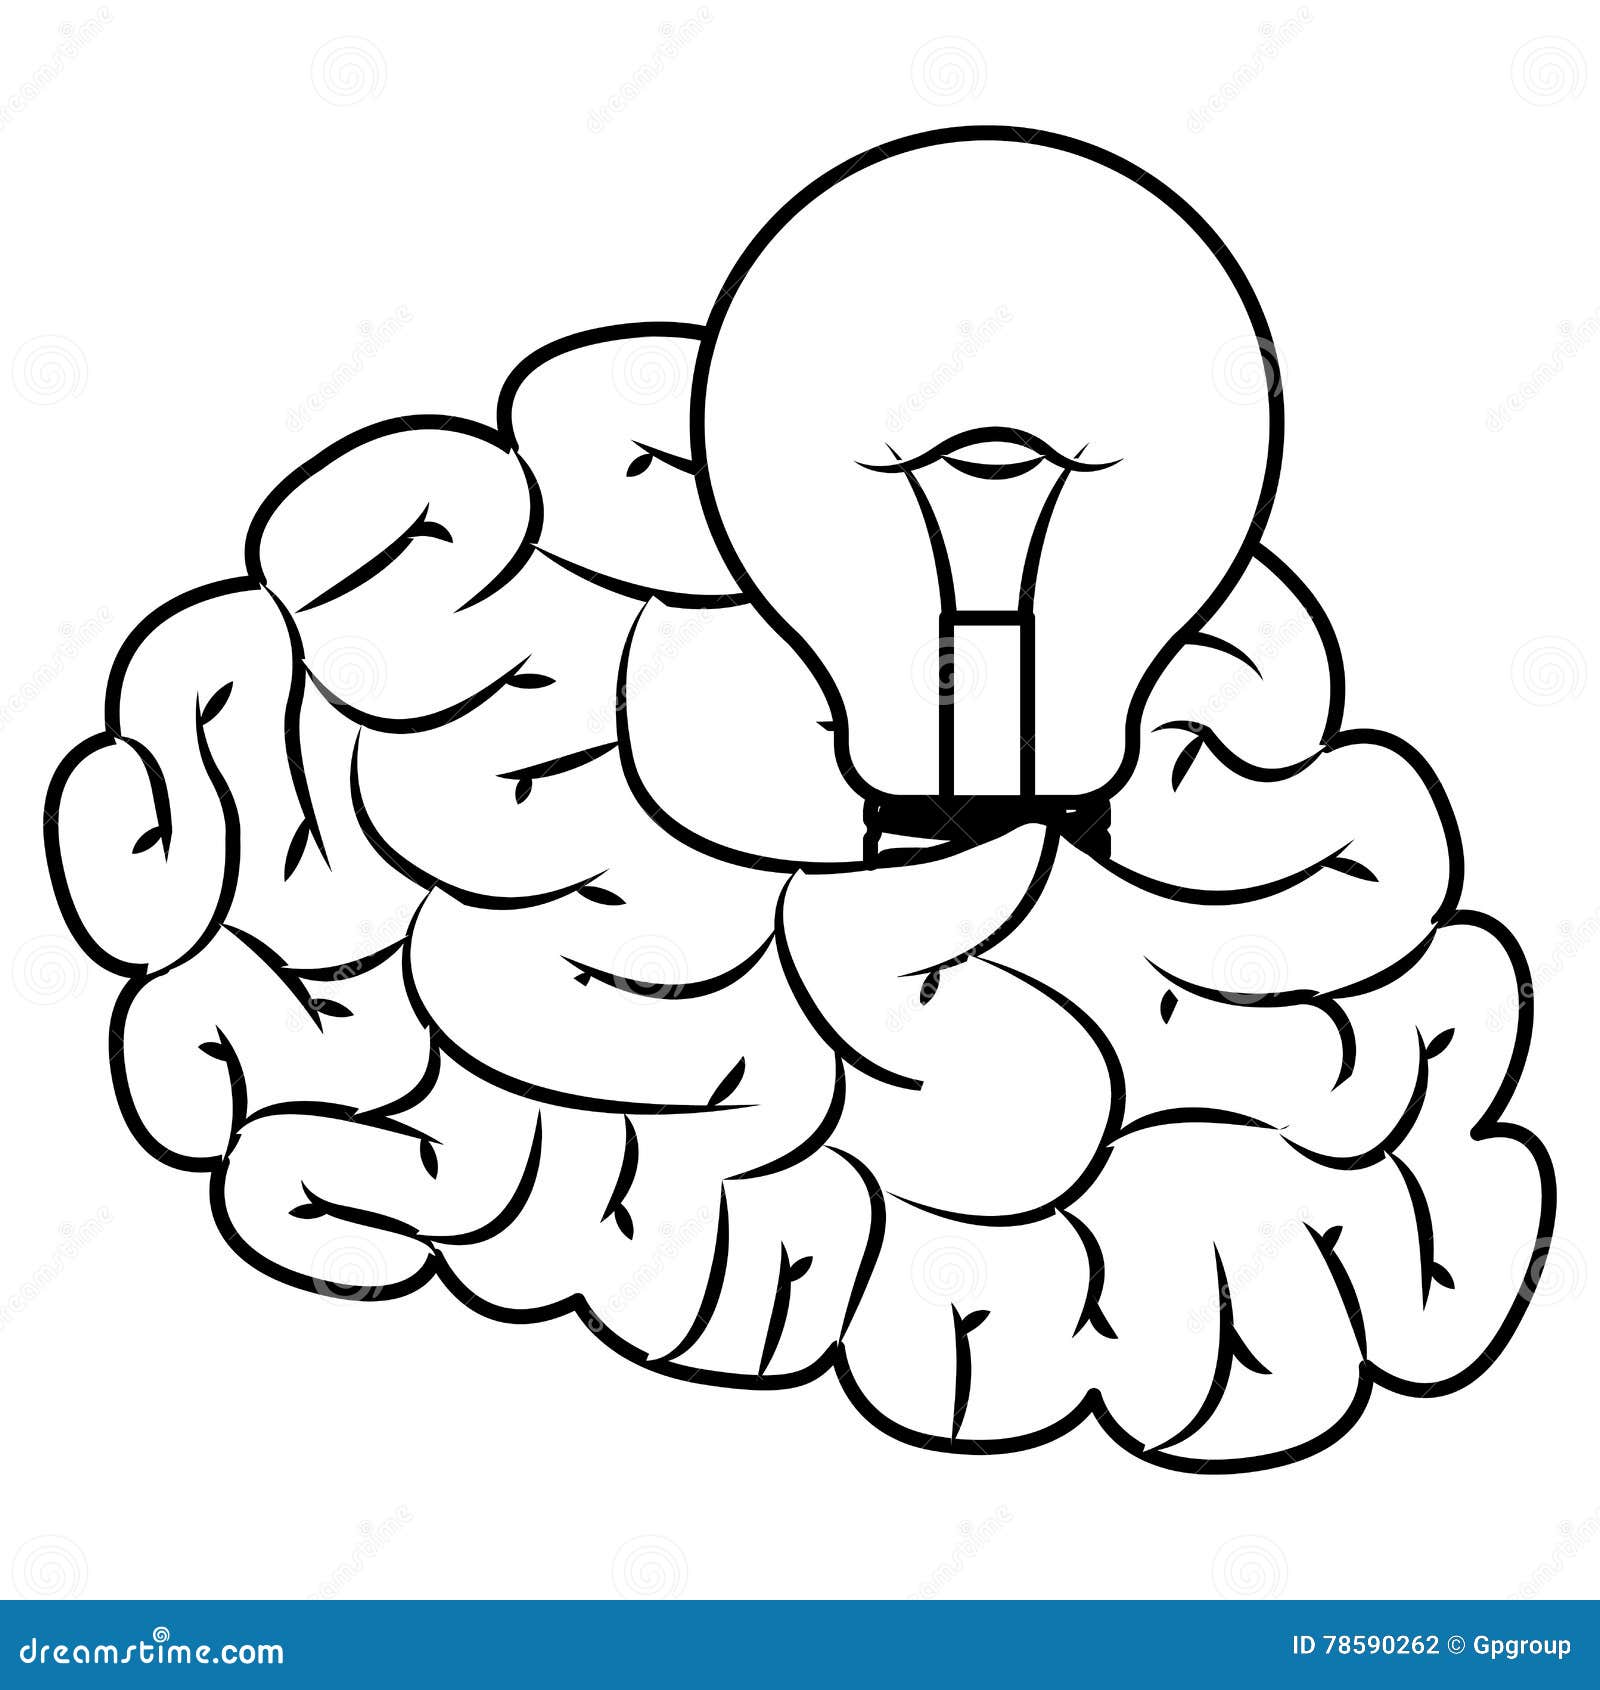 Isolated and Silhouette Brain and Light Bulb Design Stock Vector ...